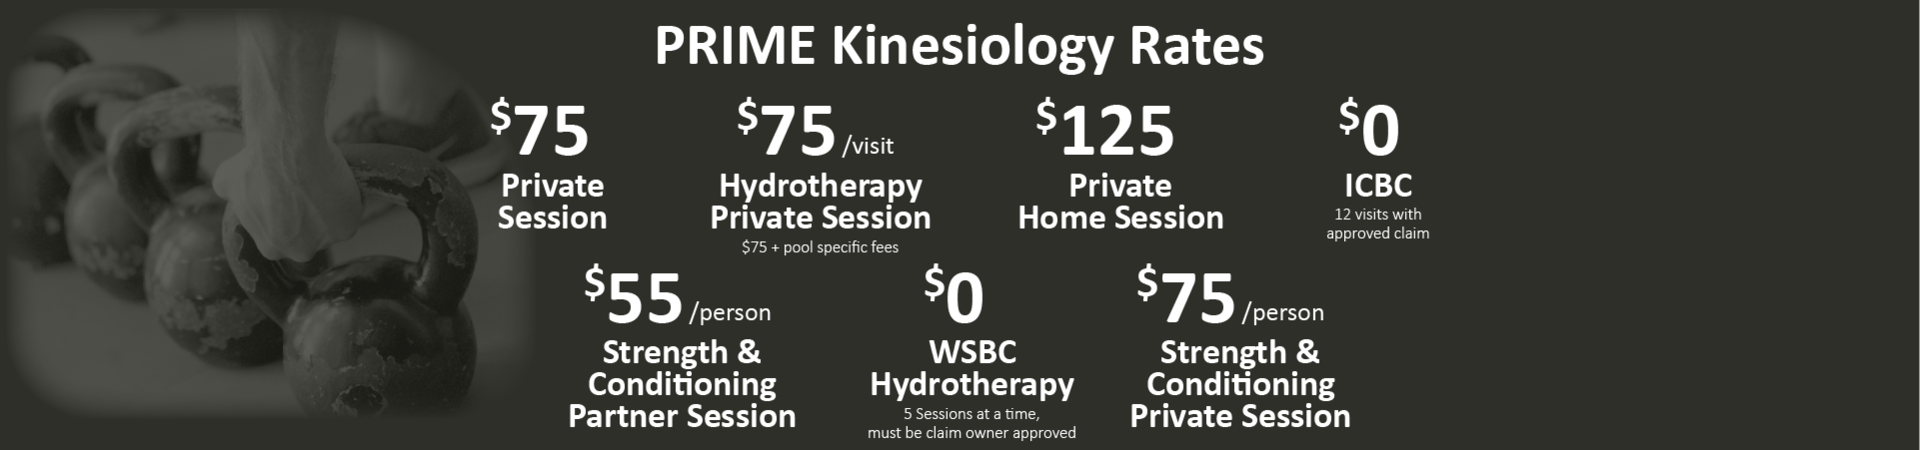 PRIME KINESIOLOGY RATES